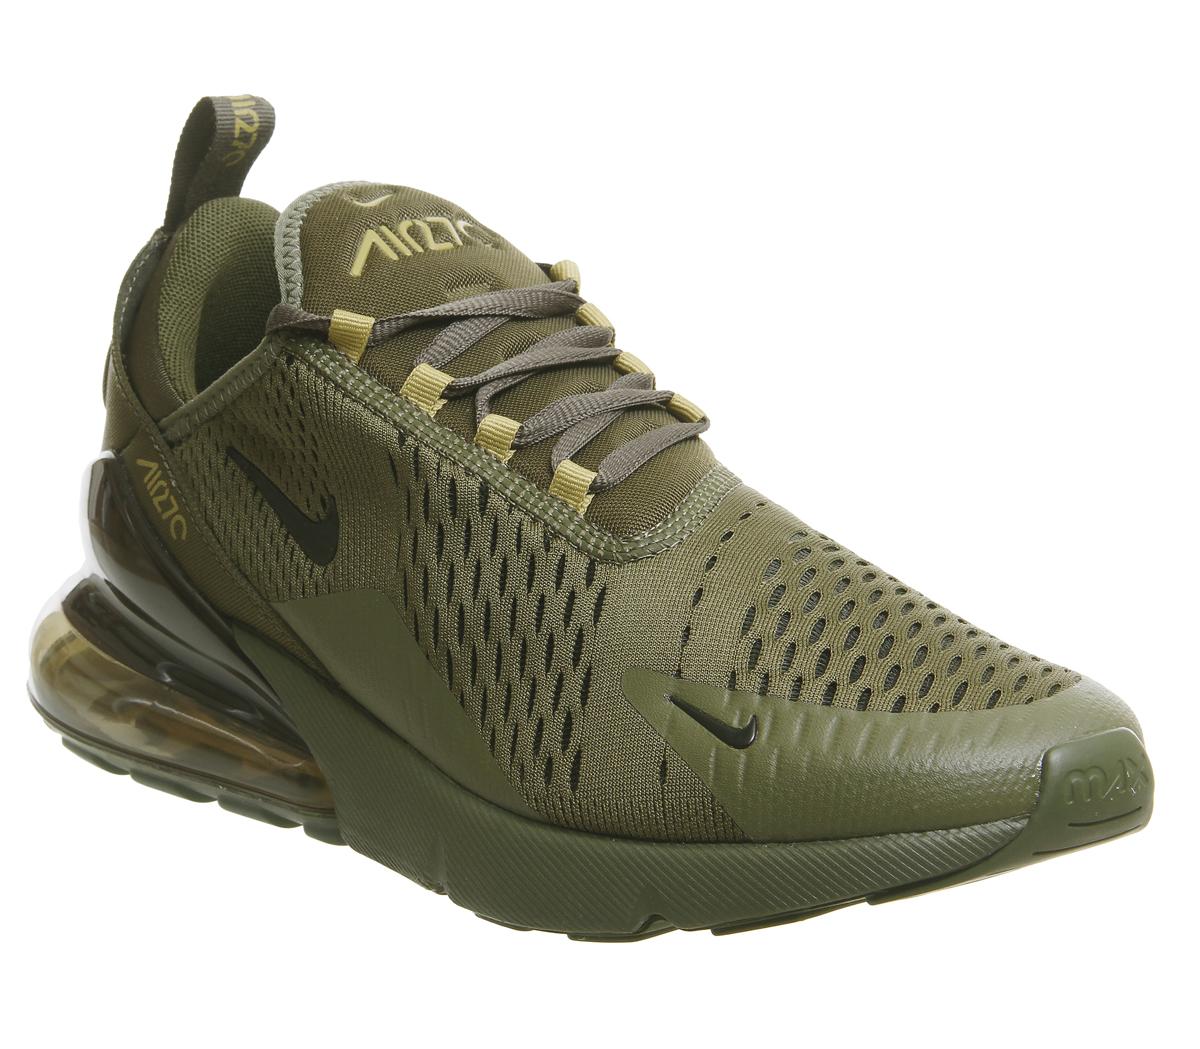 nike+air+max+270+olive+green Promotions